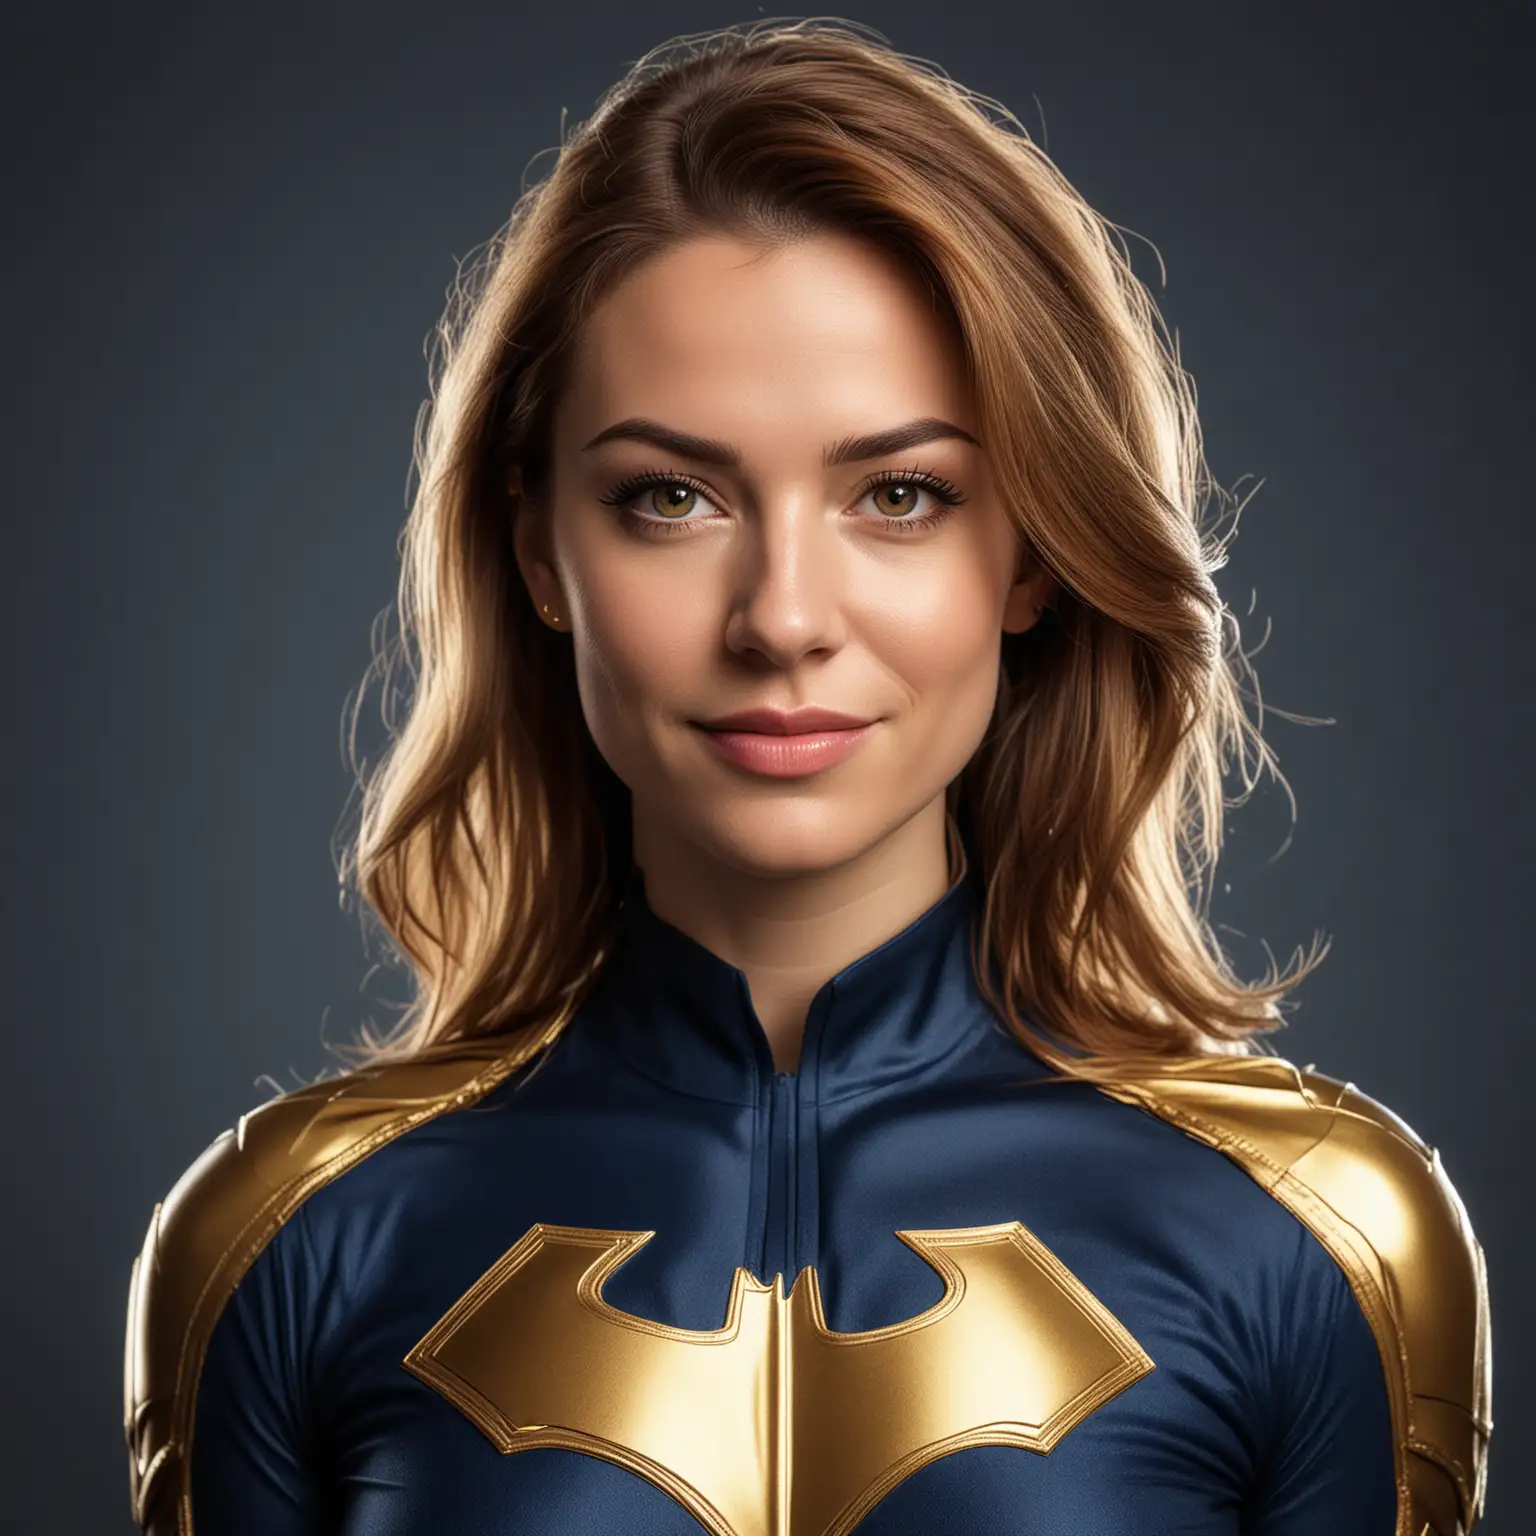 Woman Client Success Manager in Dark Blue and Gold Superhero Attire Cinematic Marvel Portrait